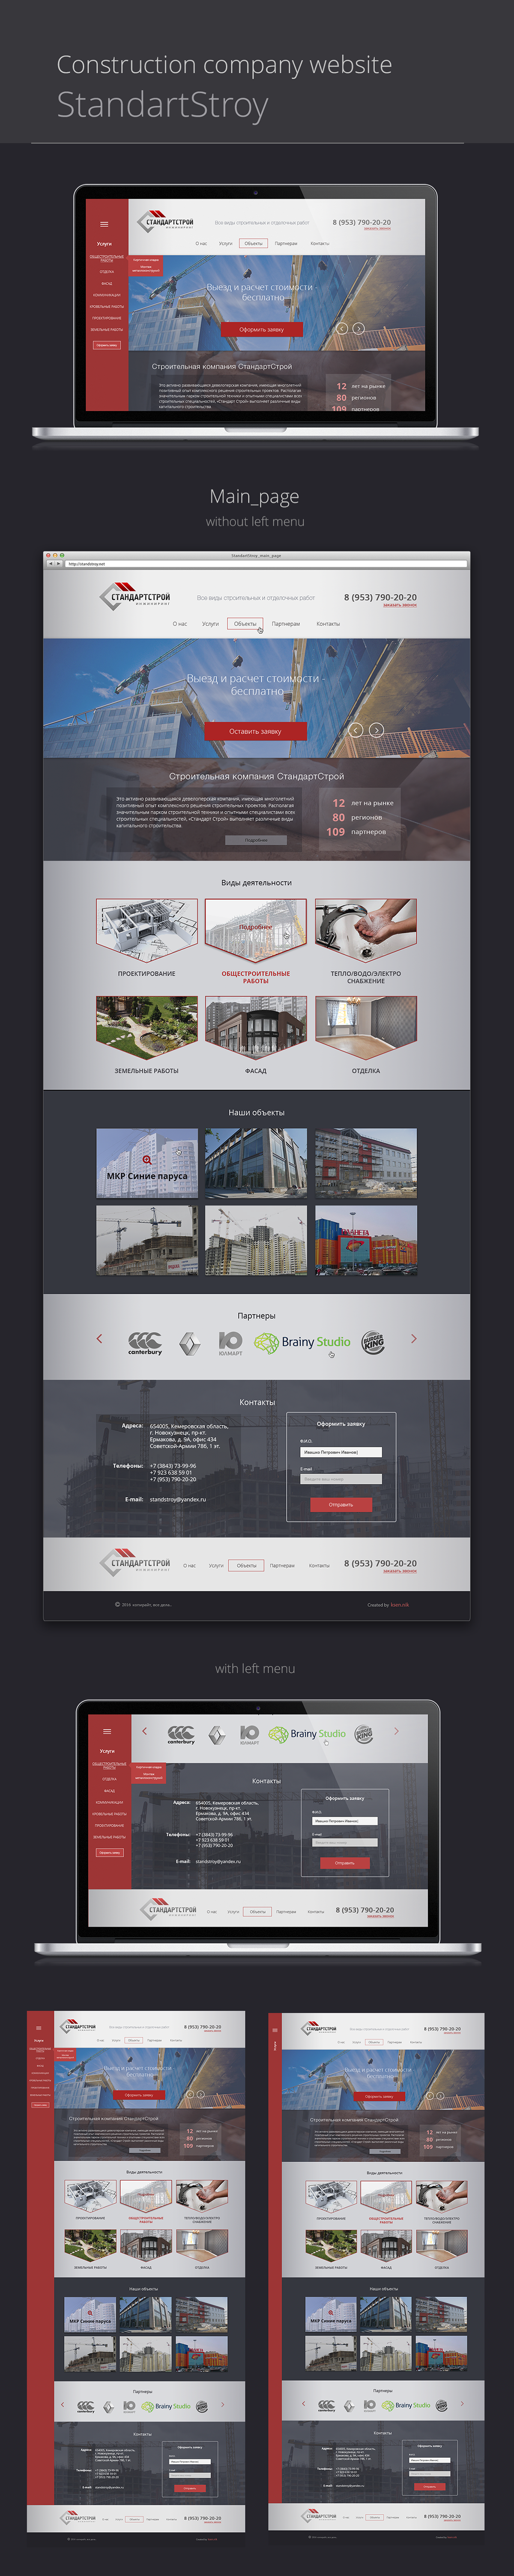 landing page constraction company  Website